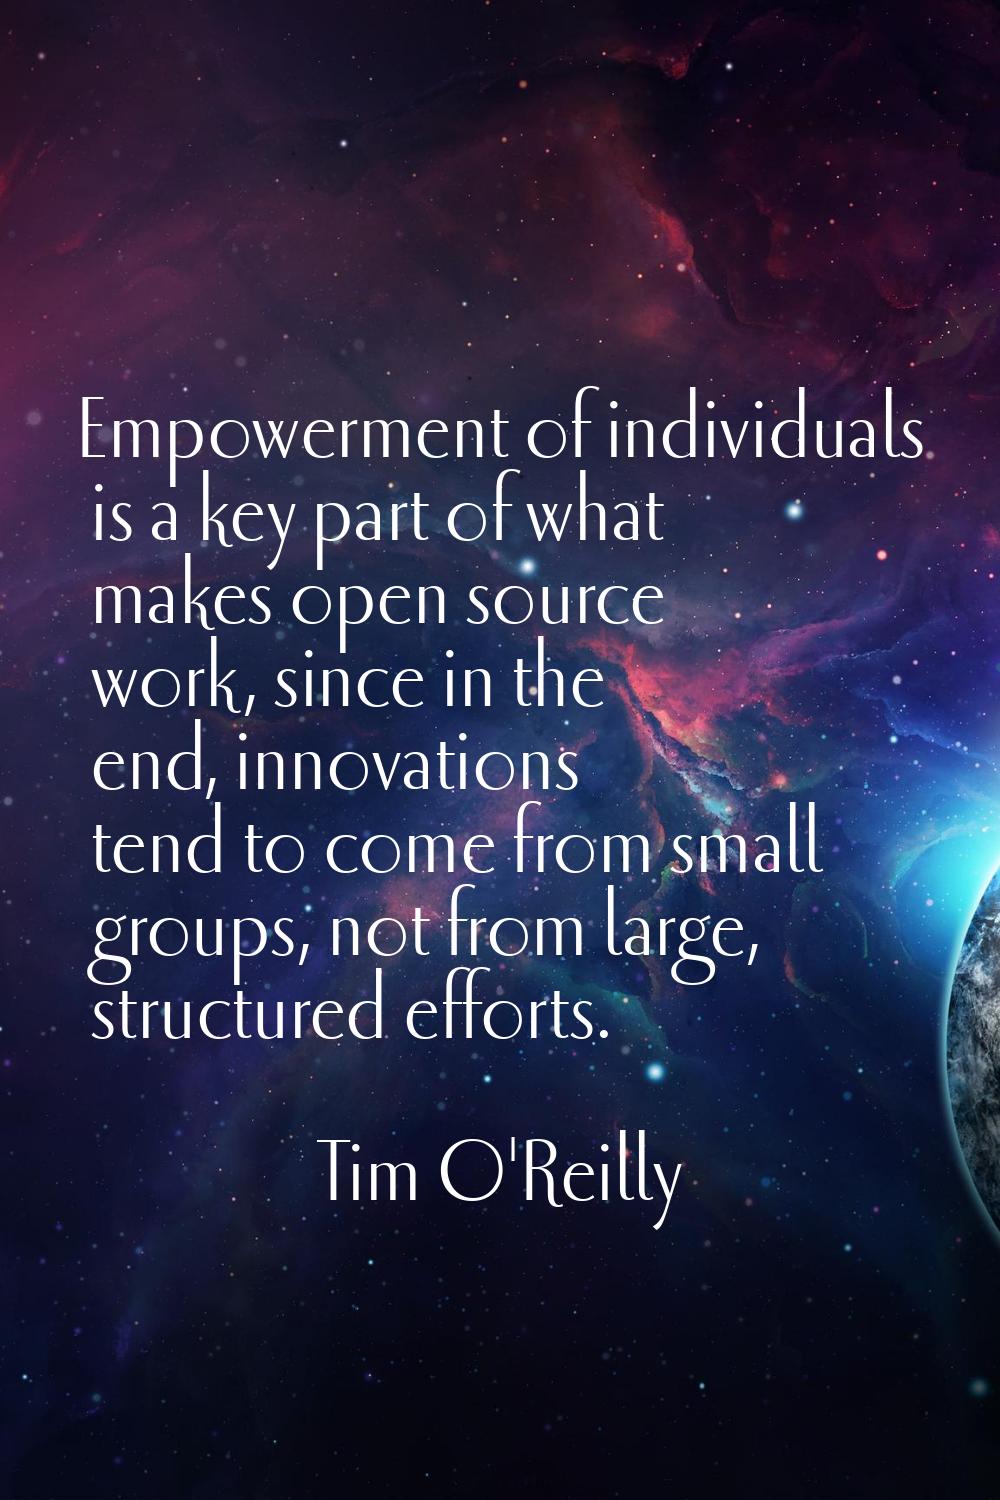 Empowerment of individuals is a key part of what makes open source work, since in the end, innovati